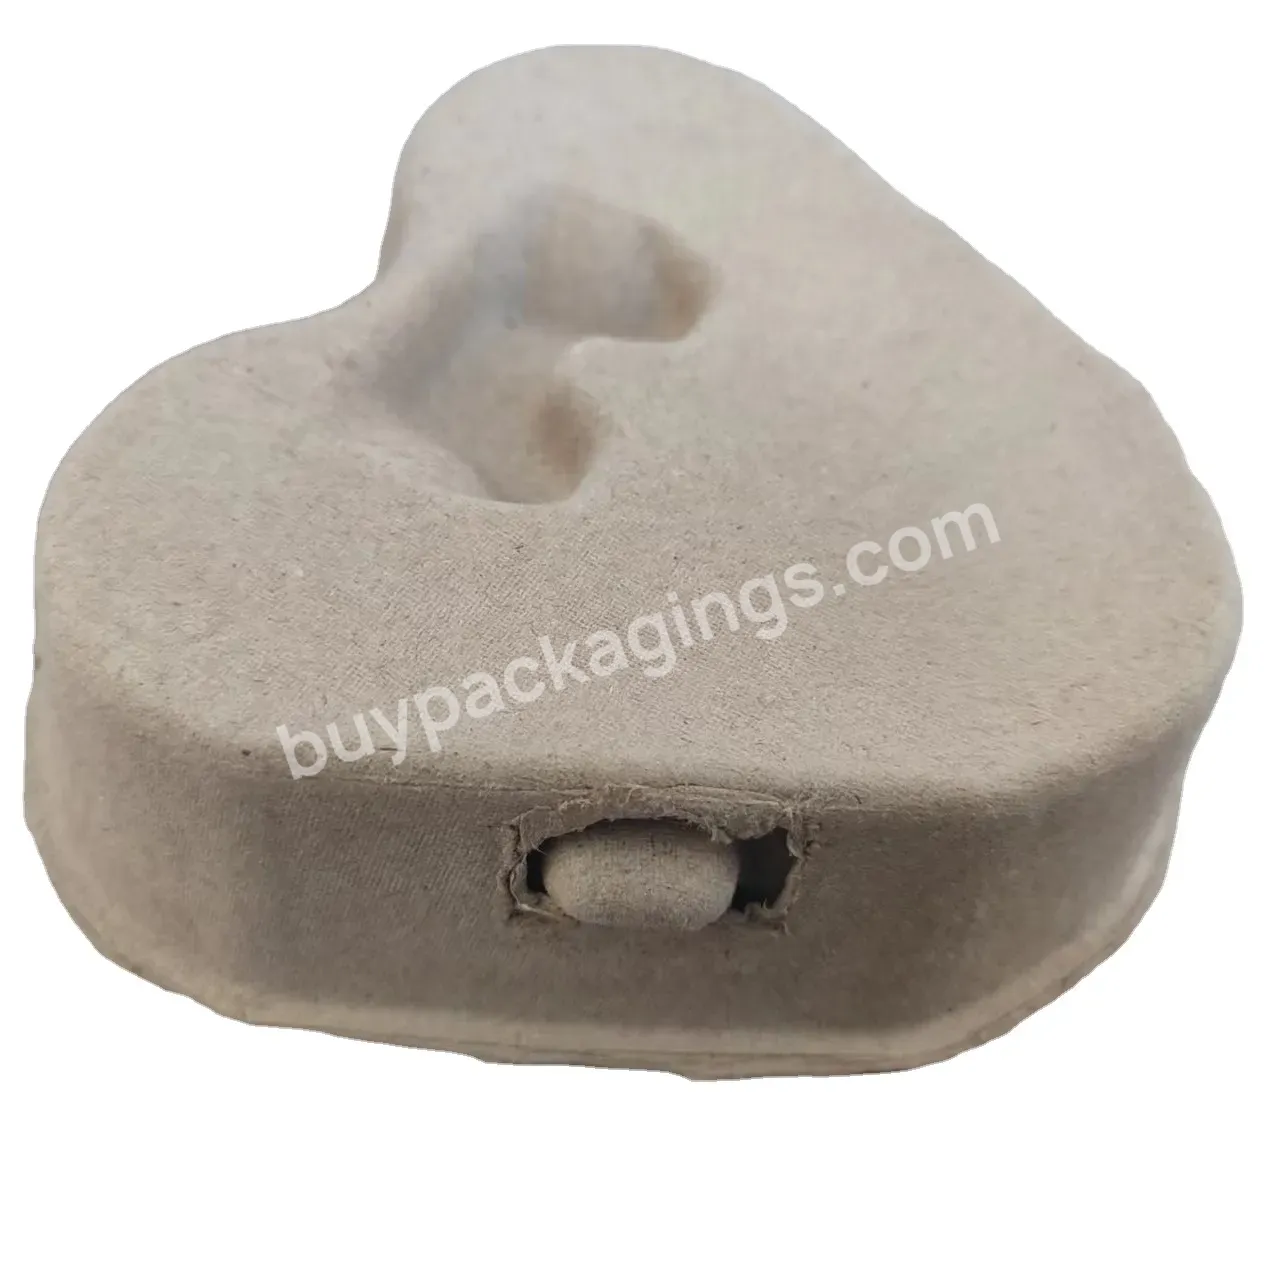 Molded Cup Carrier Egg Carton Paper Pulp Packaging For Sale 3 Cell Heart-shaped - Buy Cup Carrier,Cup Holder,Holder Tray Product.